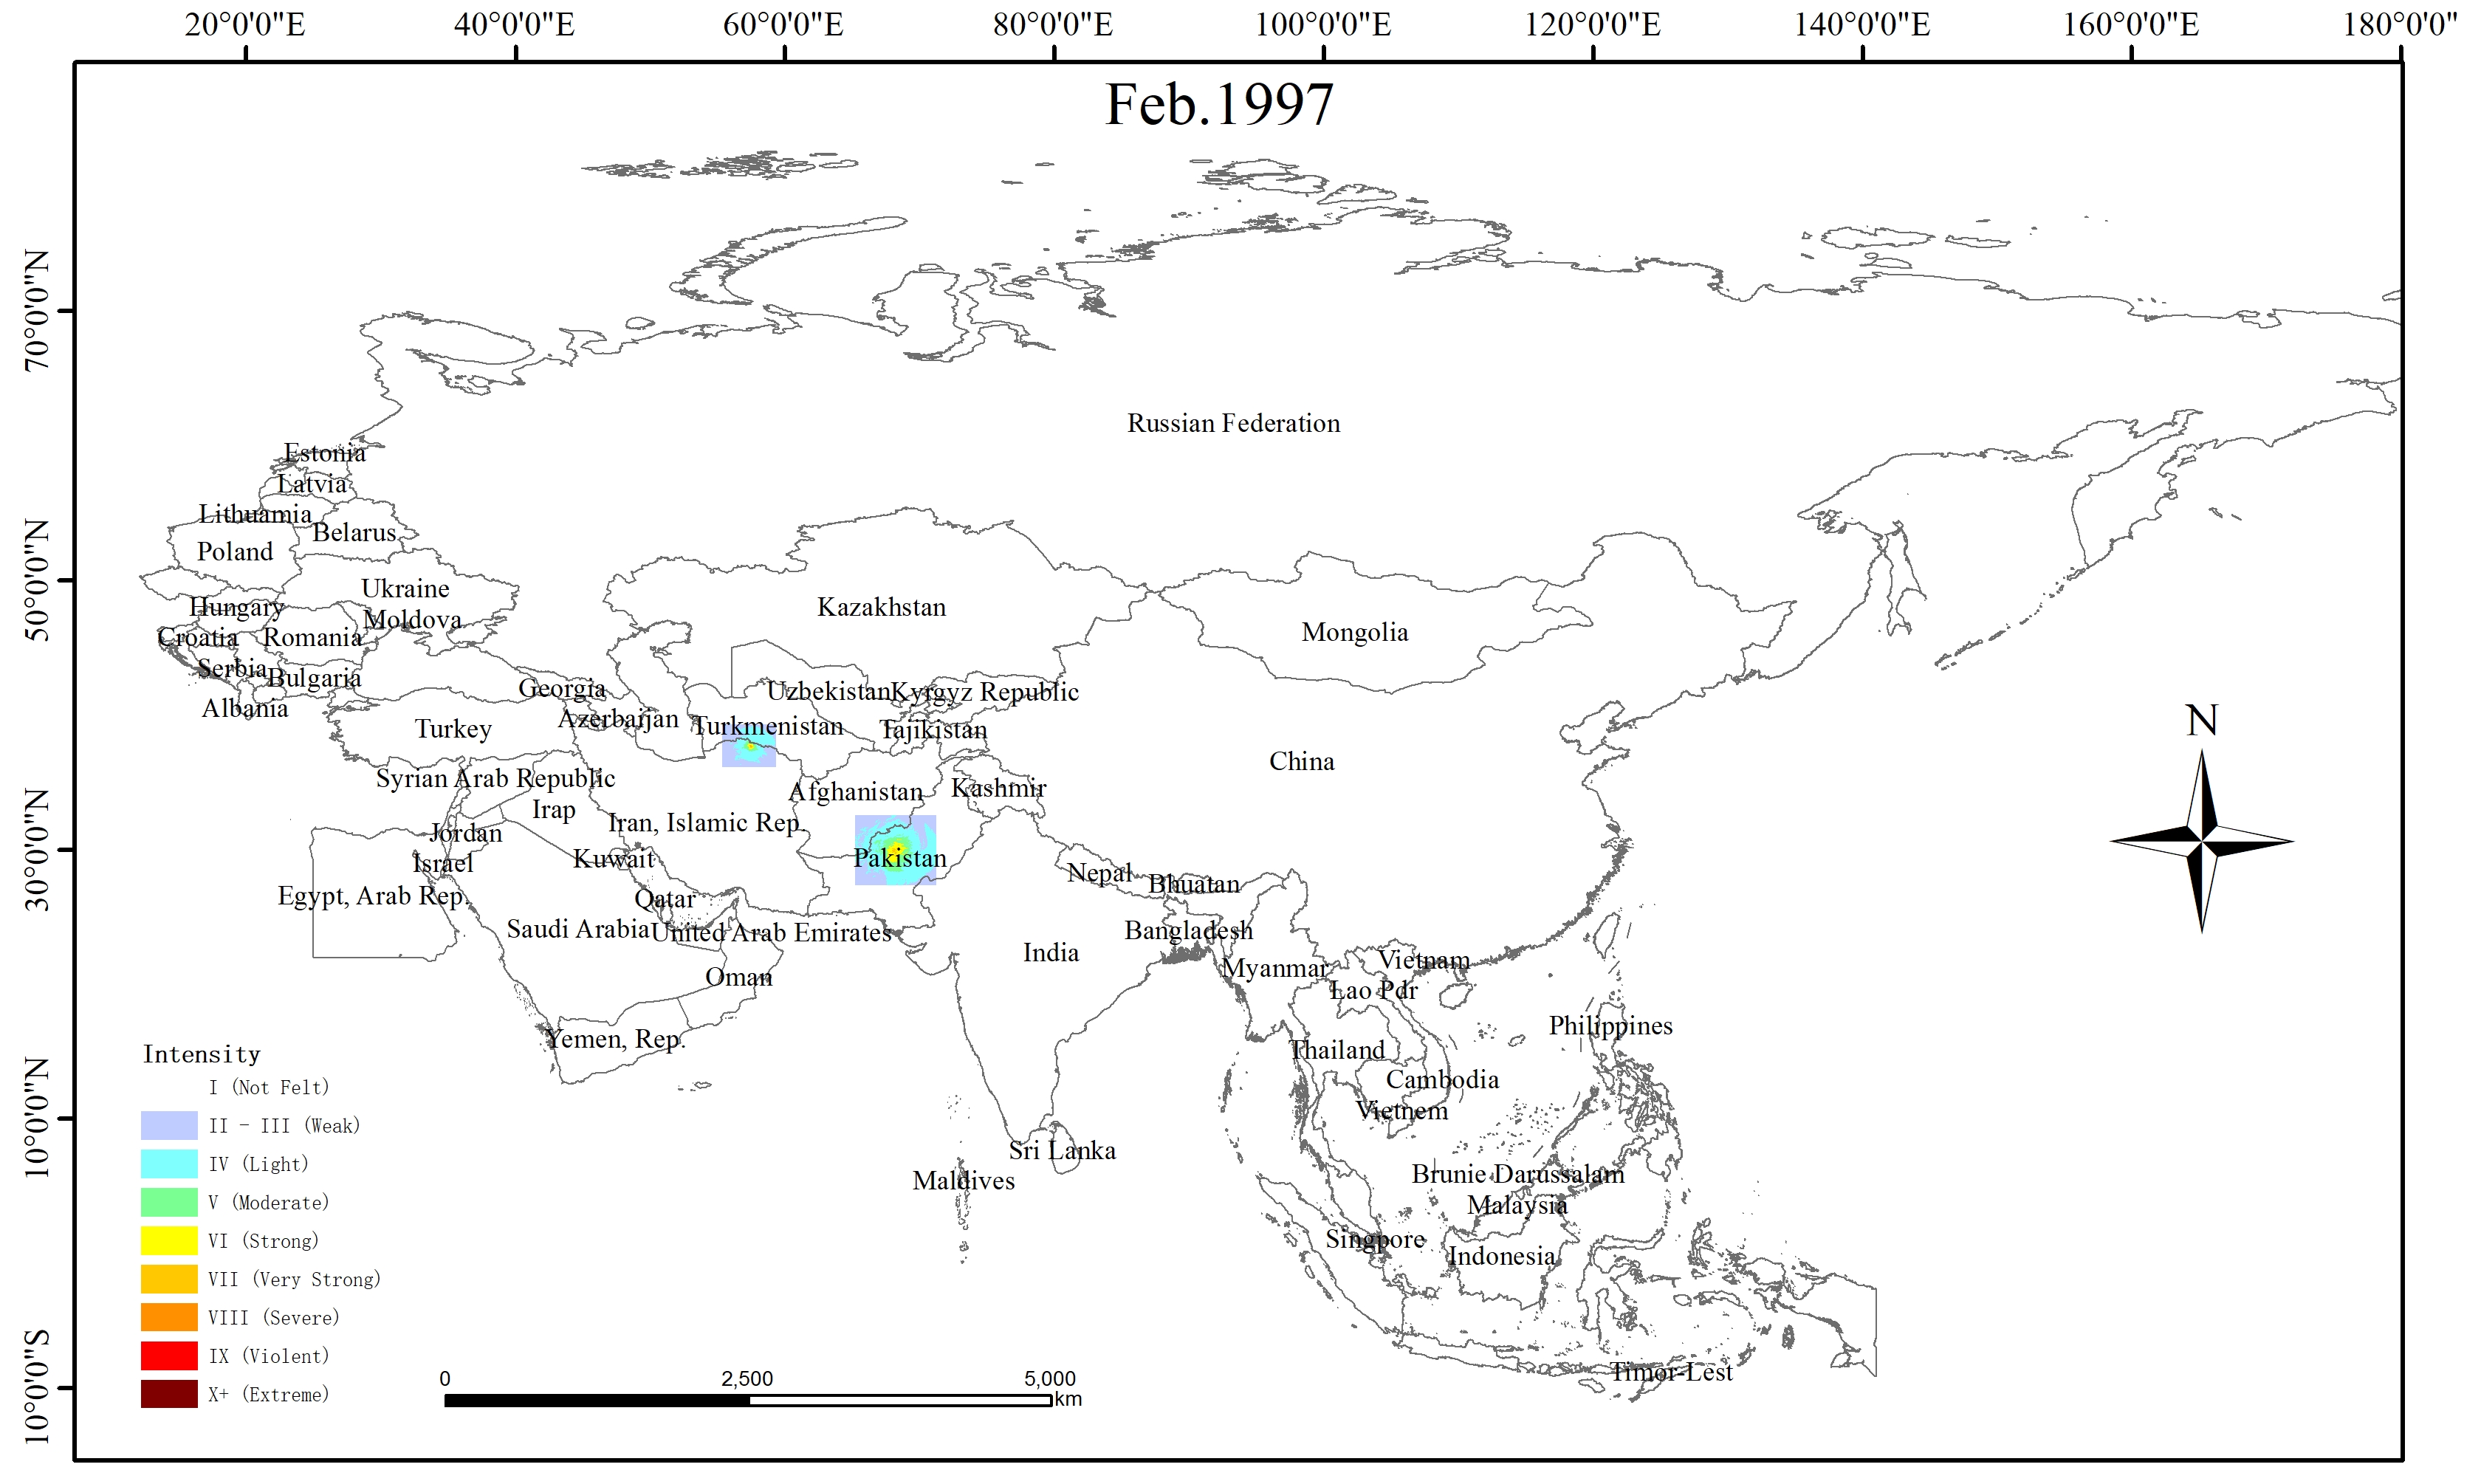 Spatio-temporal Distribution of Earthquake Disaster in the Belt and Road Area in 1997